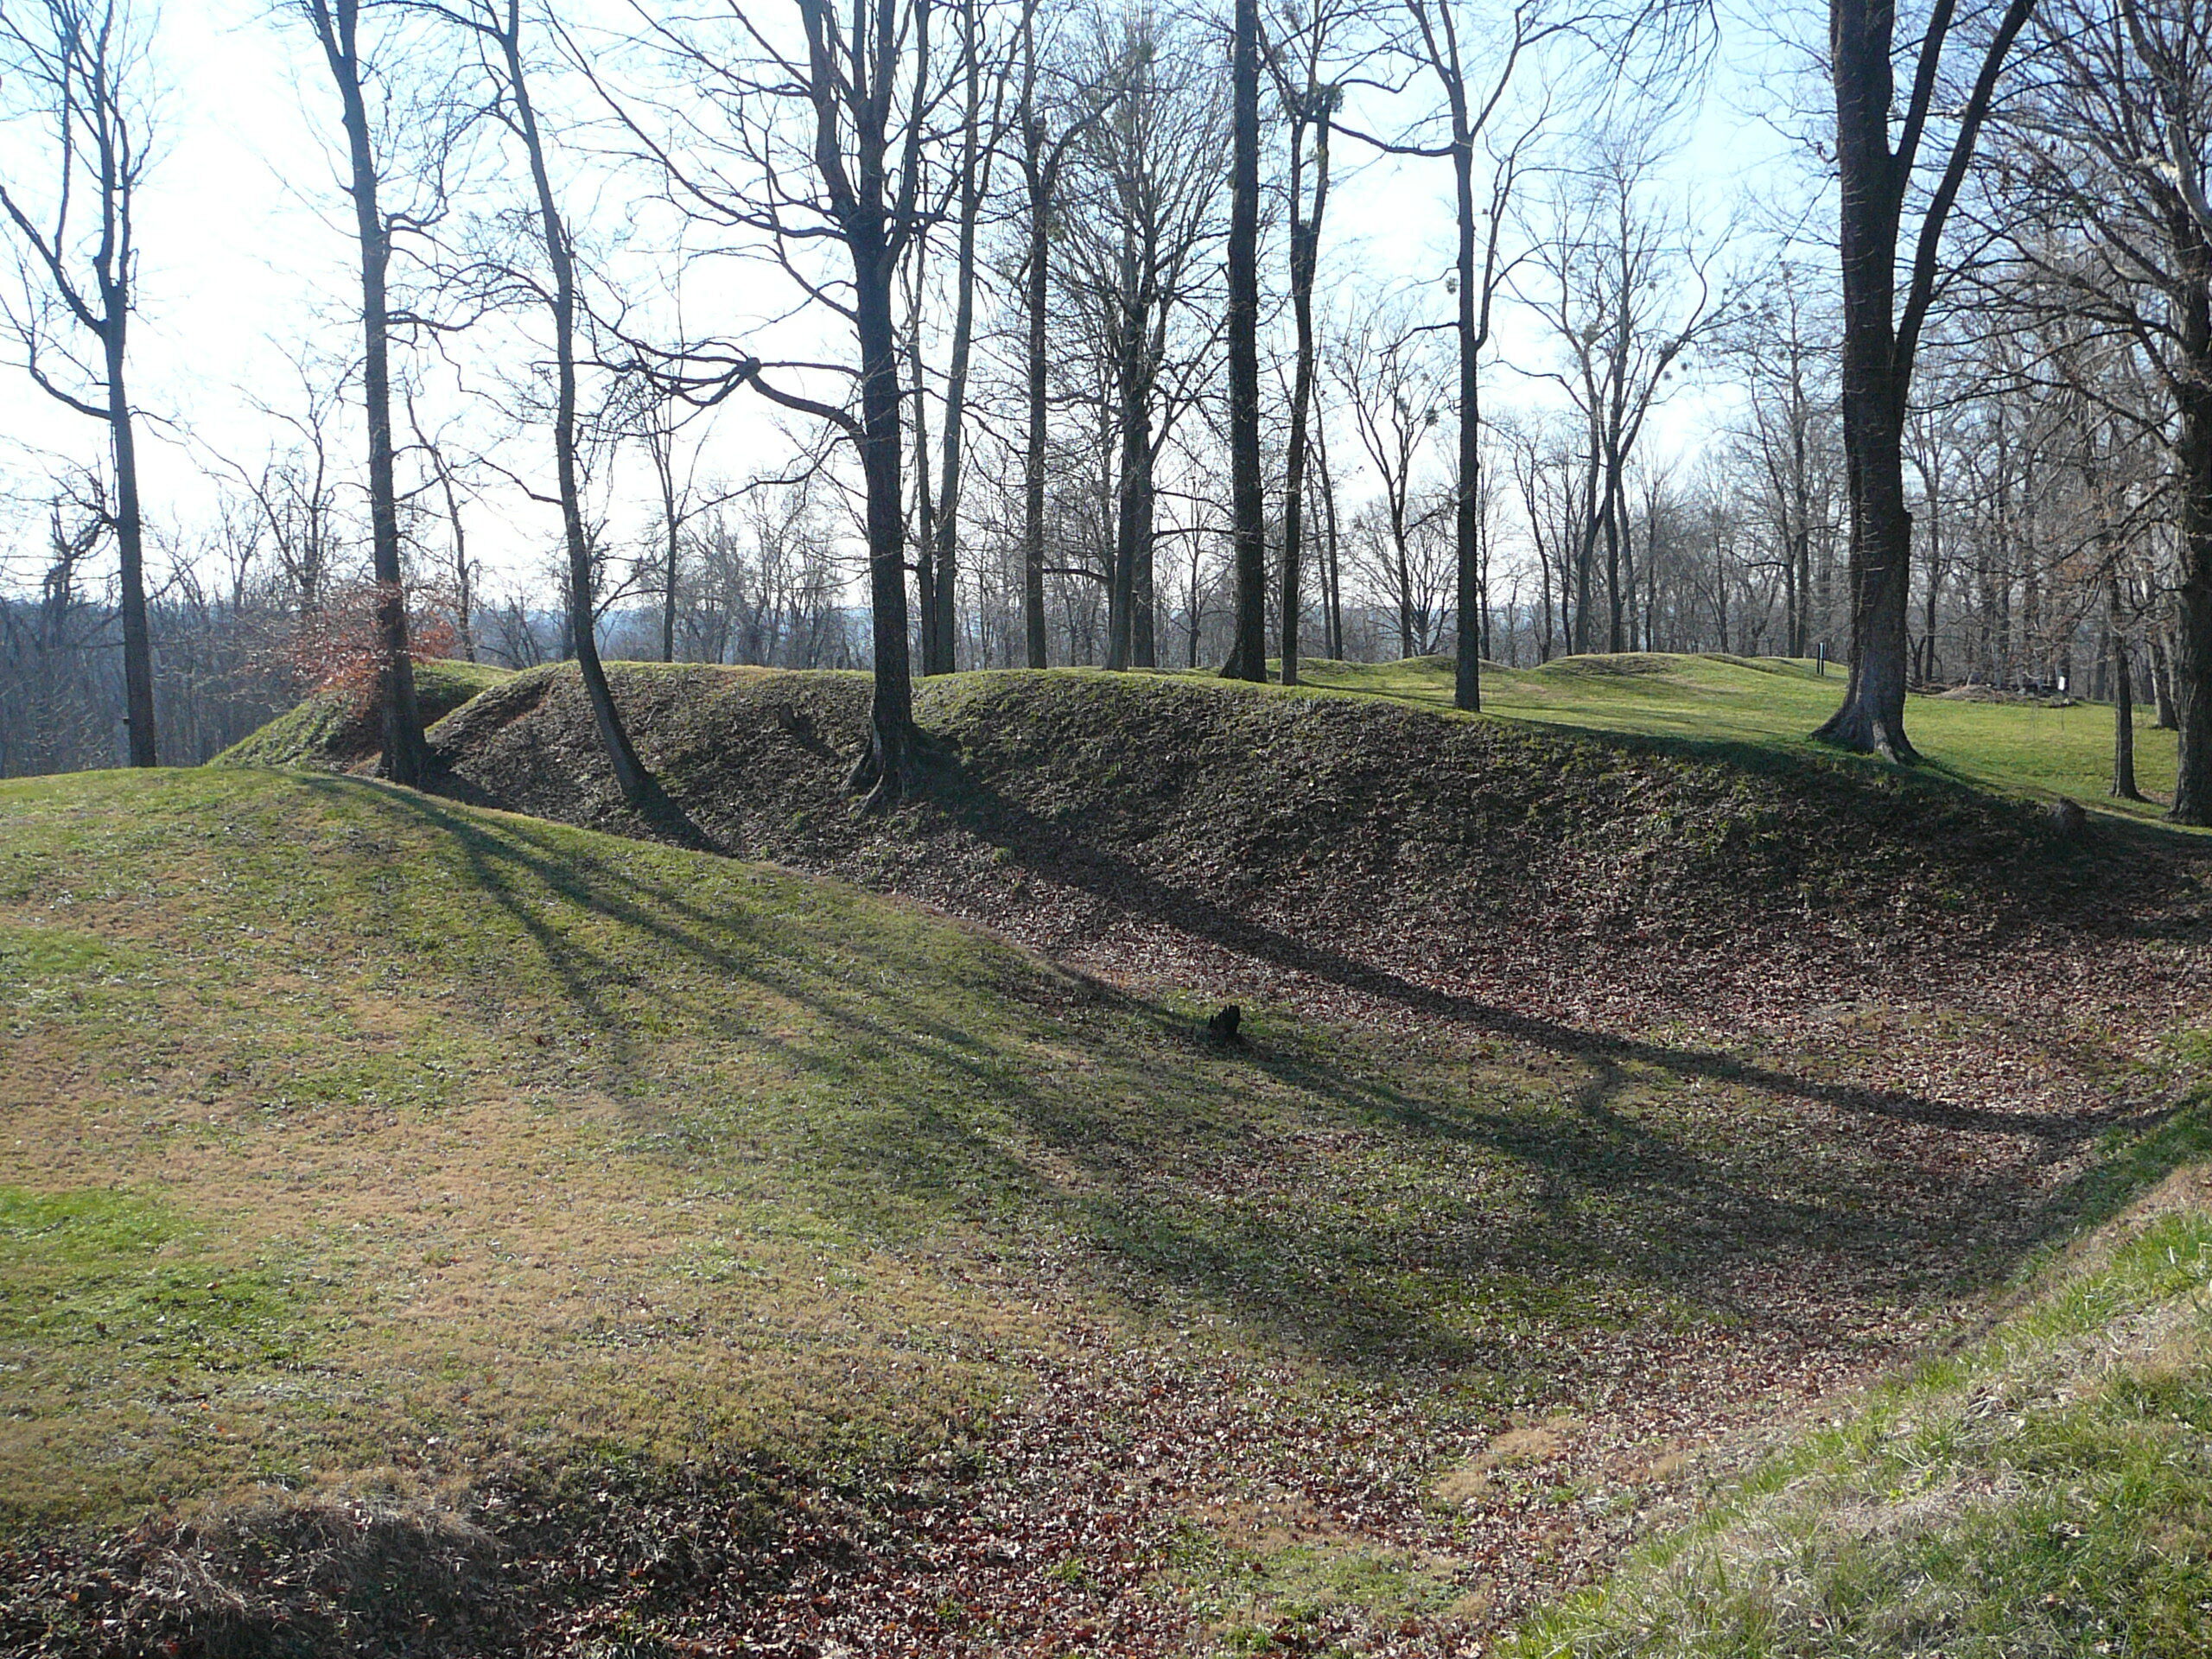 Wall and trench, Civil War U.S. Fort Duffield, West Point, Kentucky